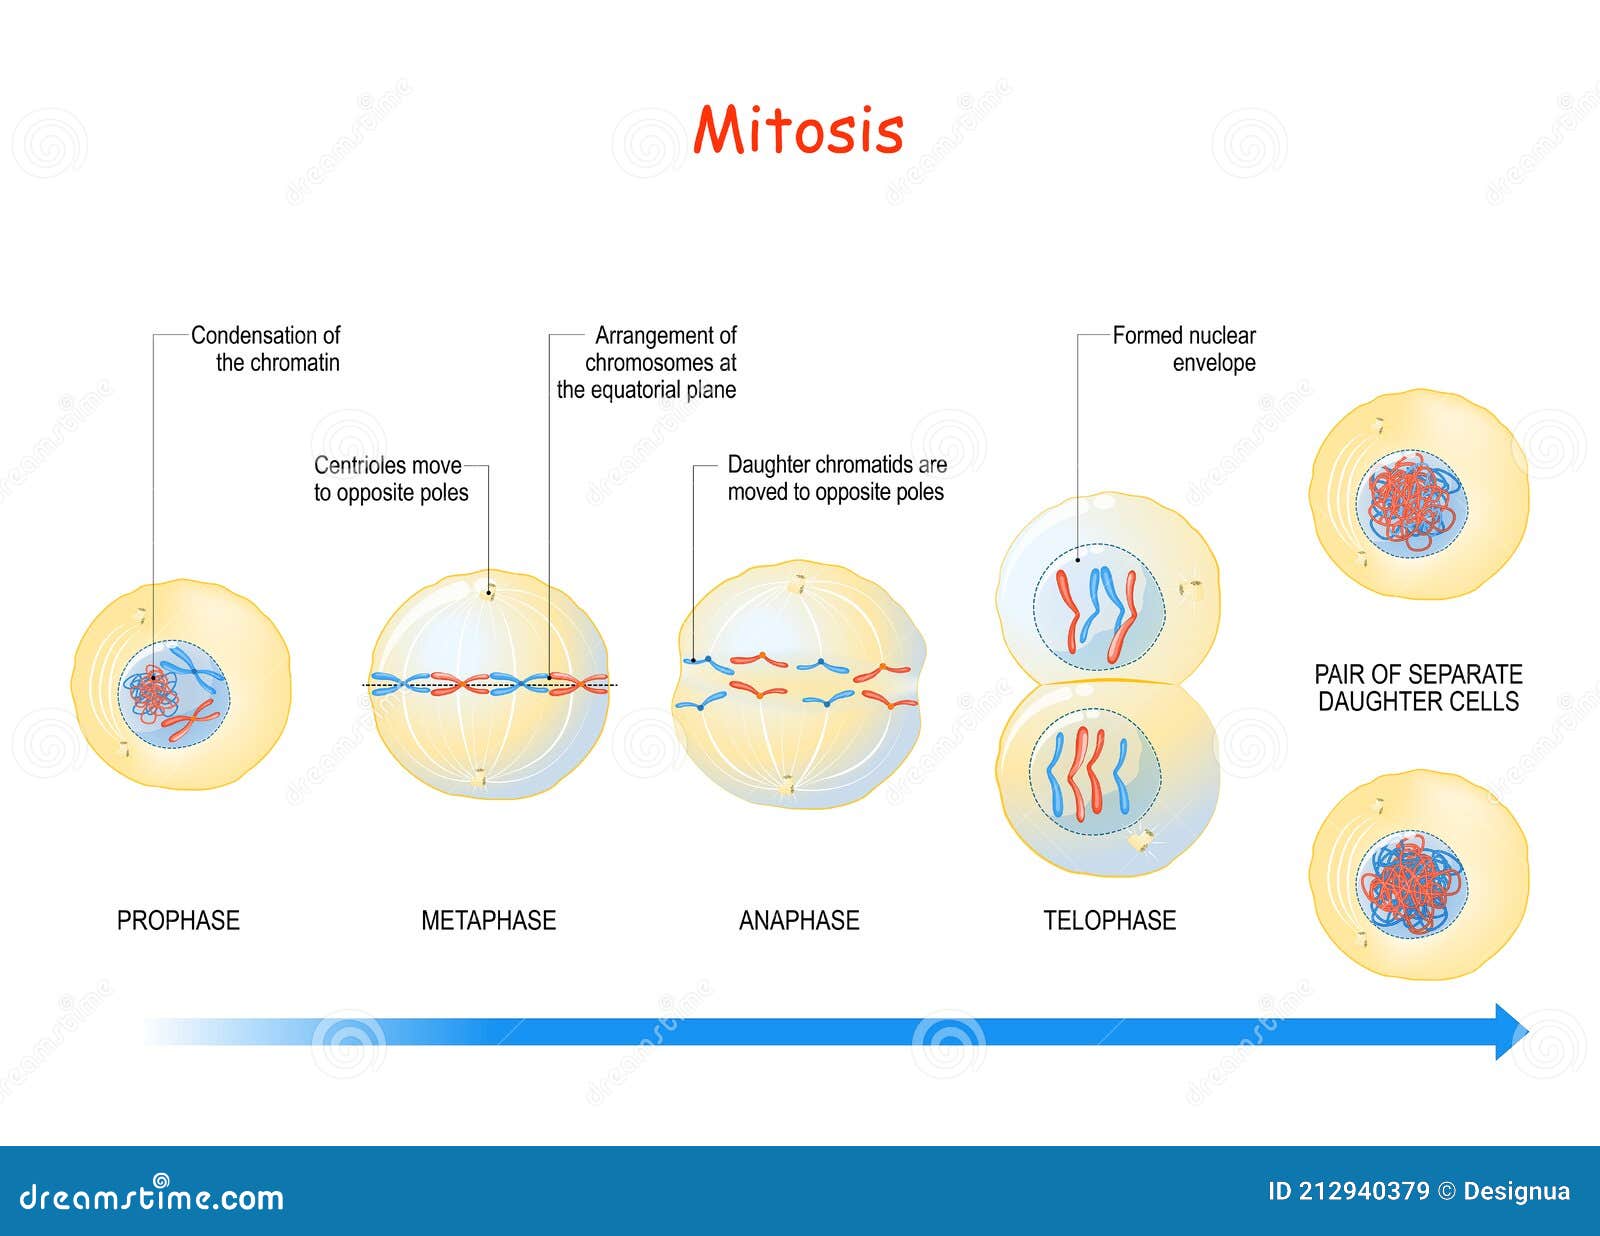 Meiosis stages